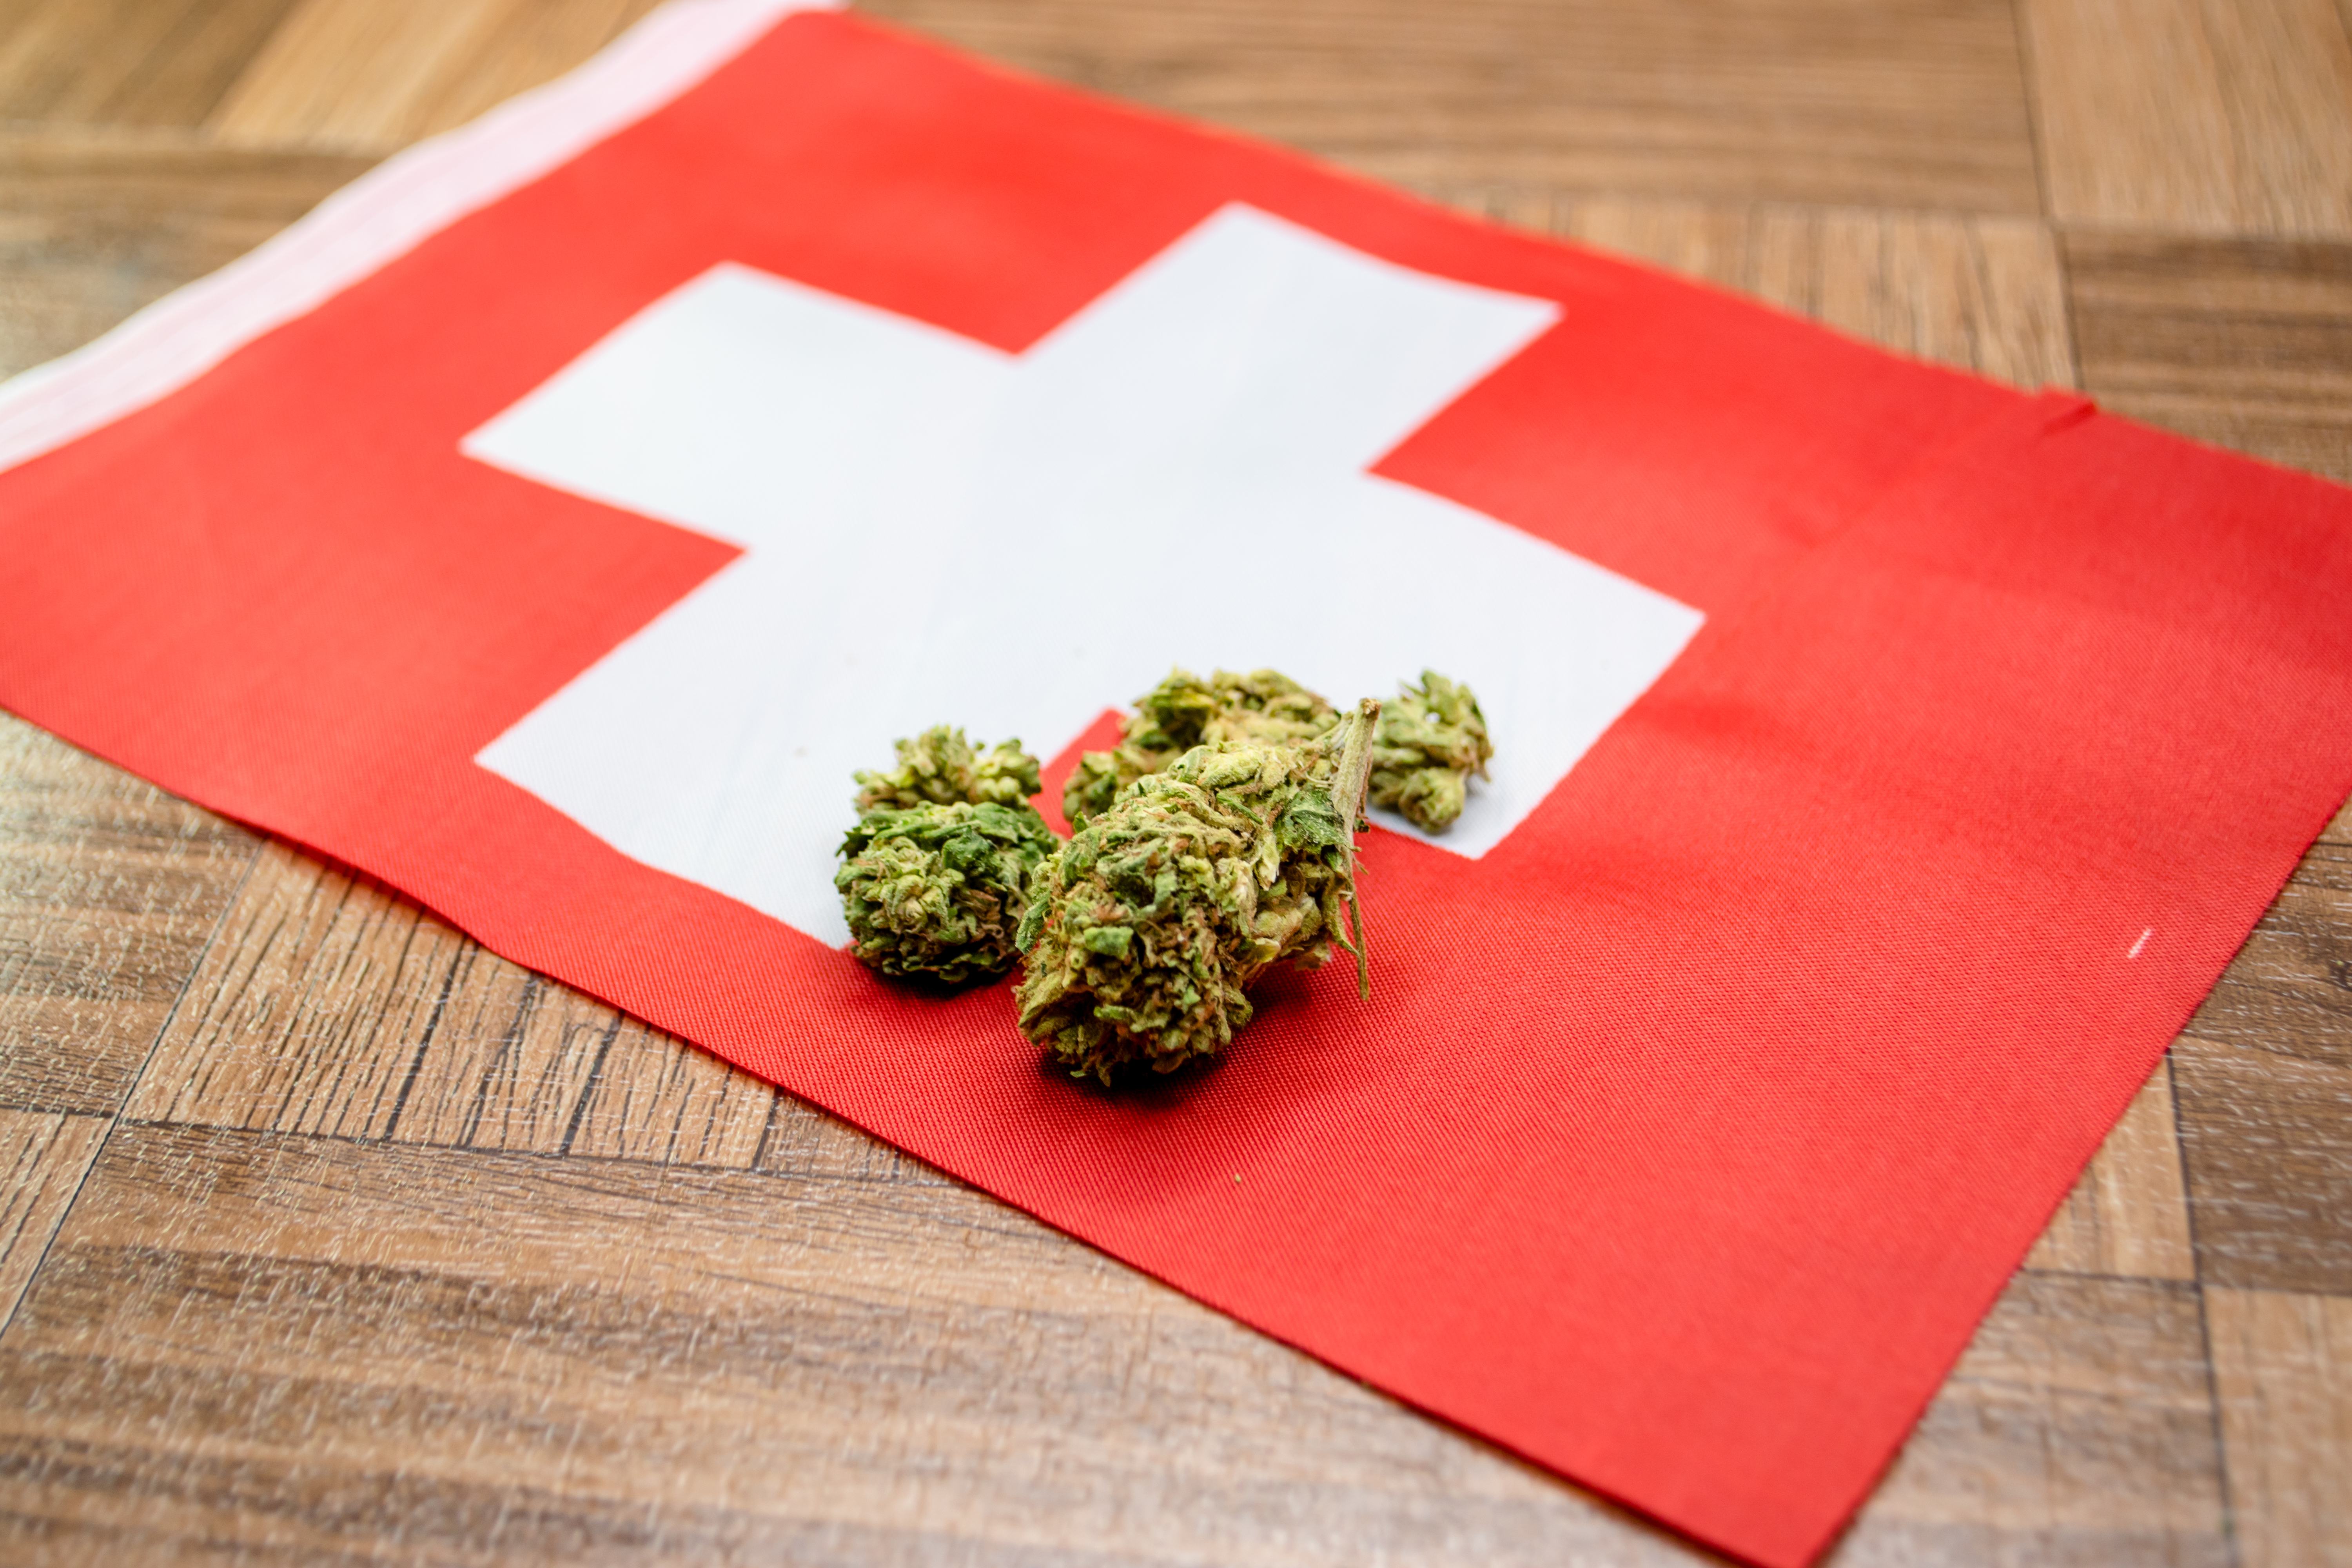 Switzerland Moves Forward with Cannabis in All its Forms